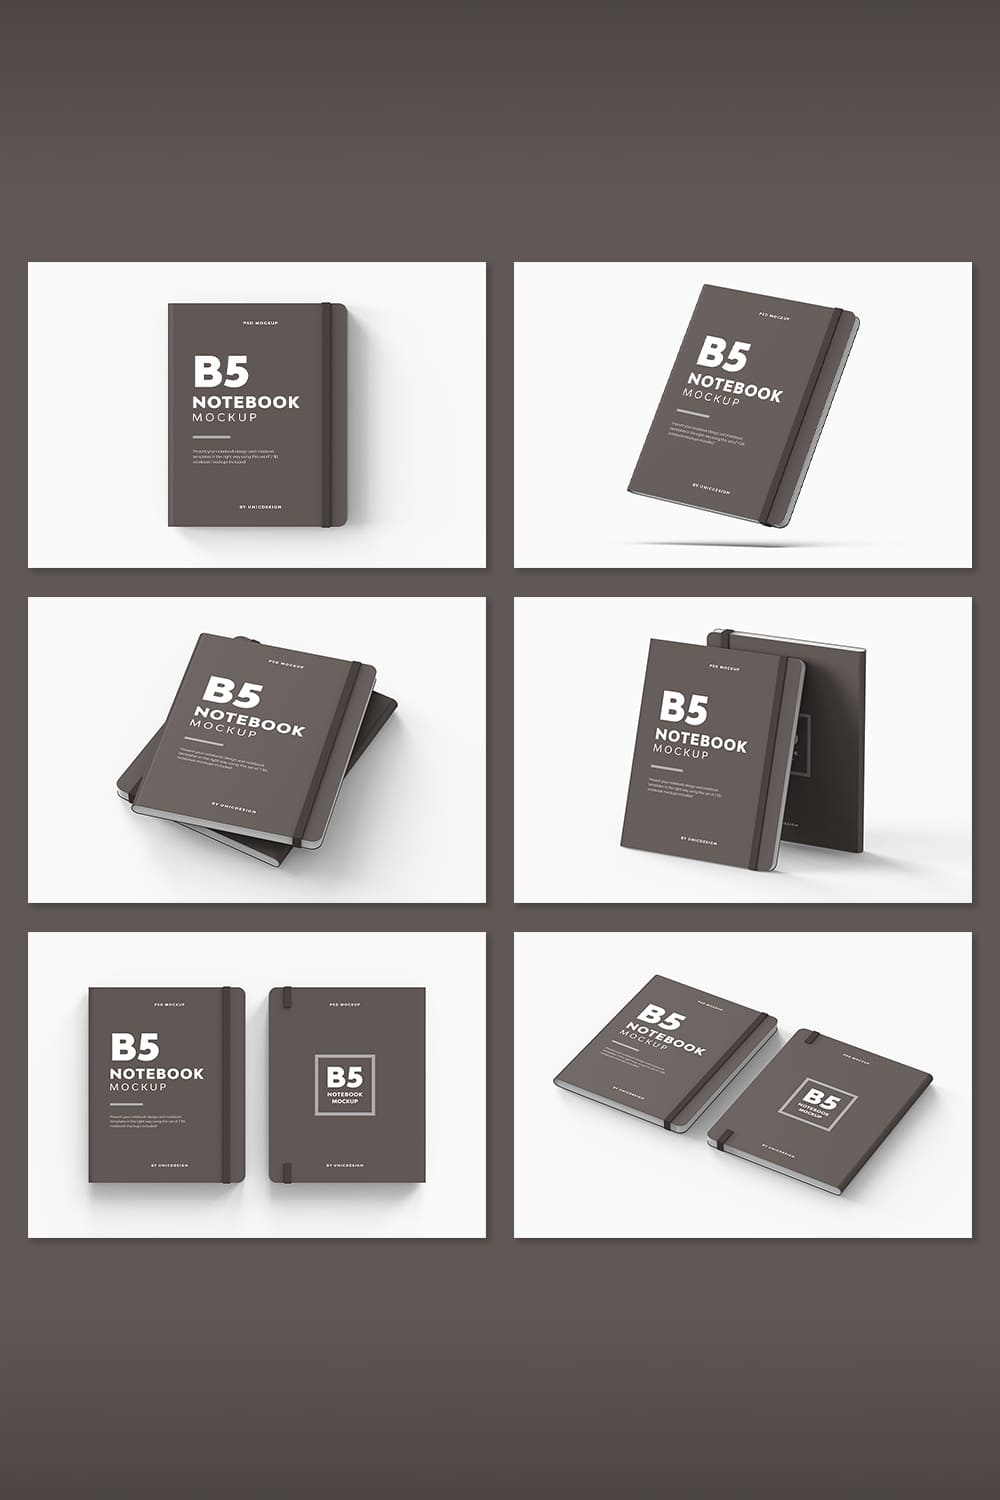 B5 notebook images cover with irresistible design.